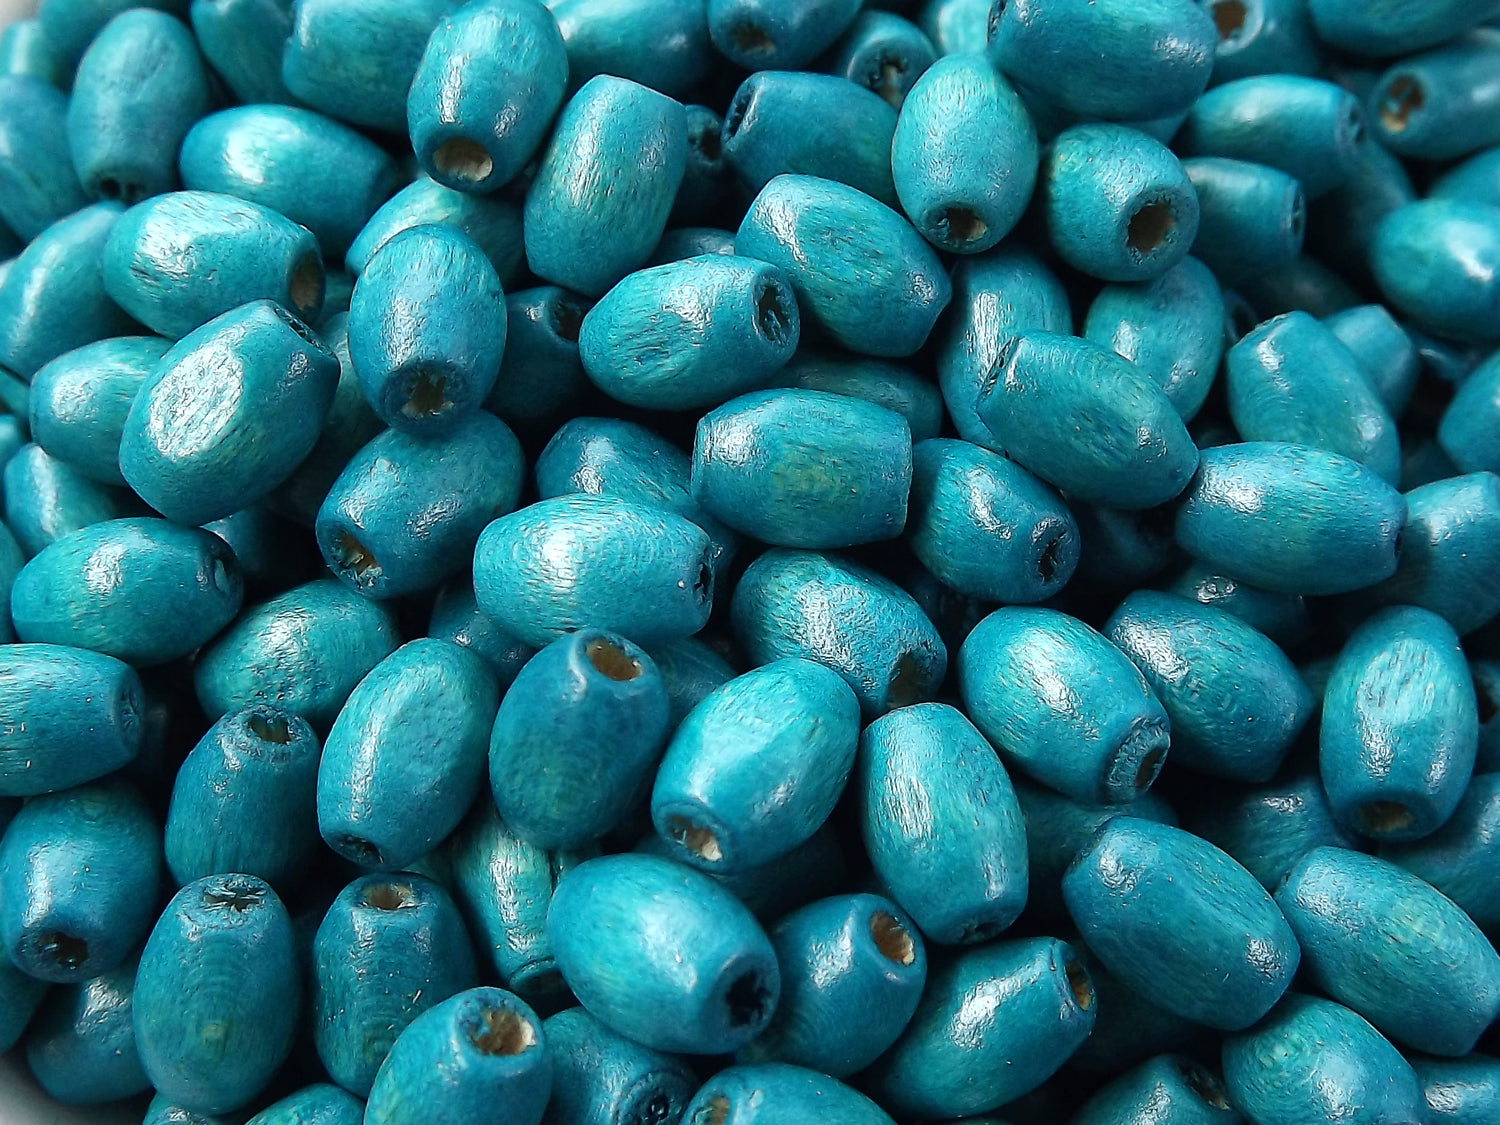 Teal Blue Wood Oval Rice Tube Beads Satin Varnished Plain Simple Round Smooth Ball Wooden Bead Spacers 8mm Choose 50pcs, 200pcs or 400pcs